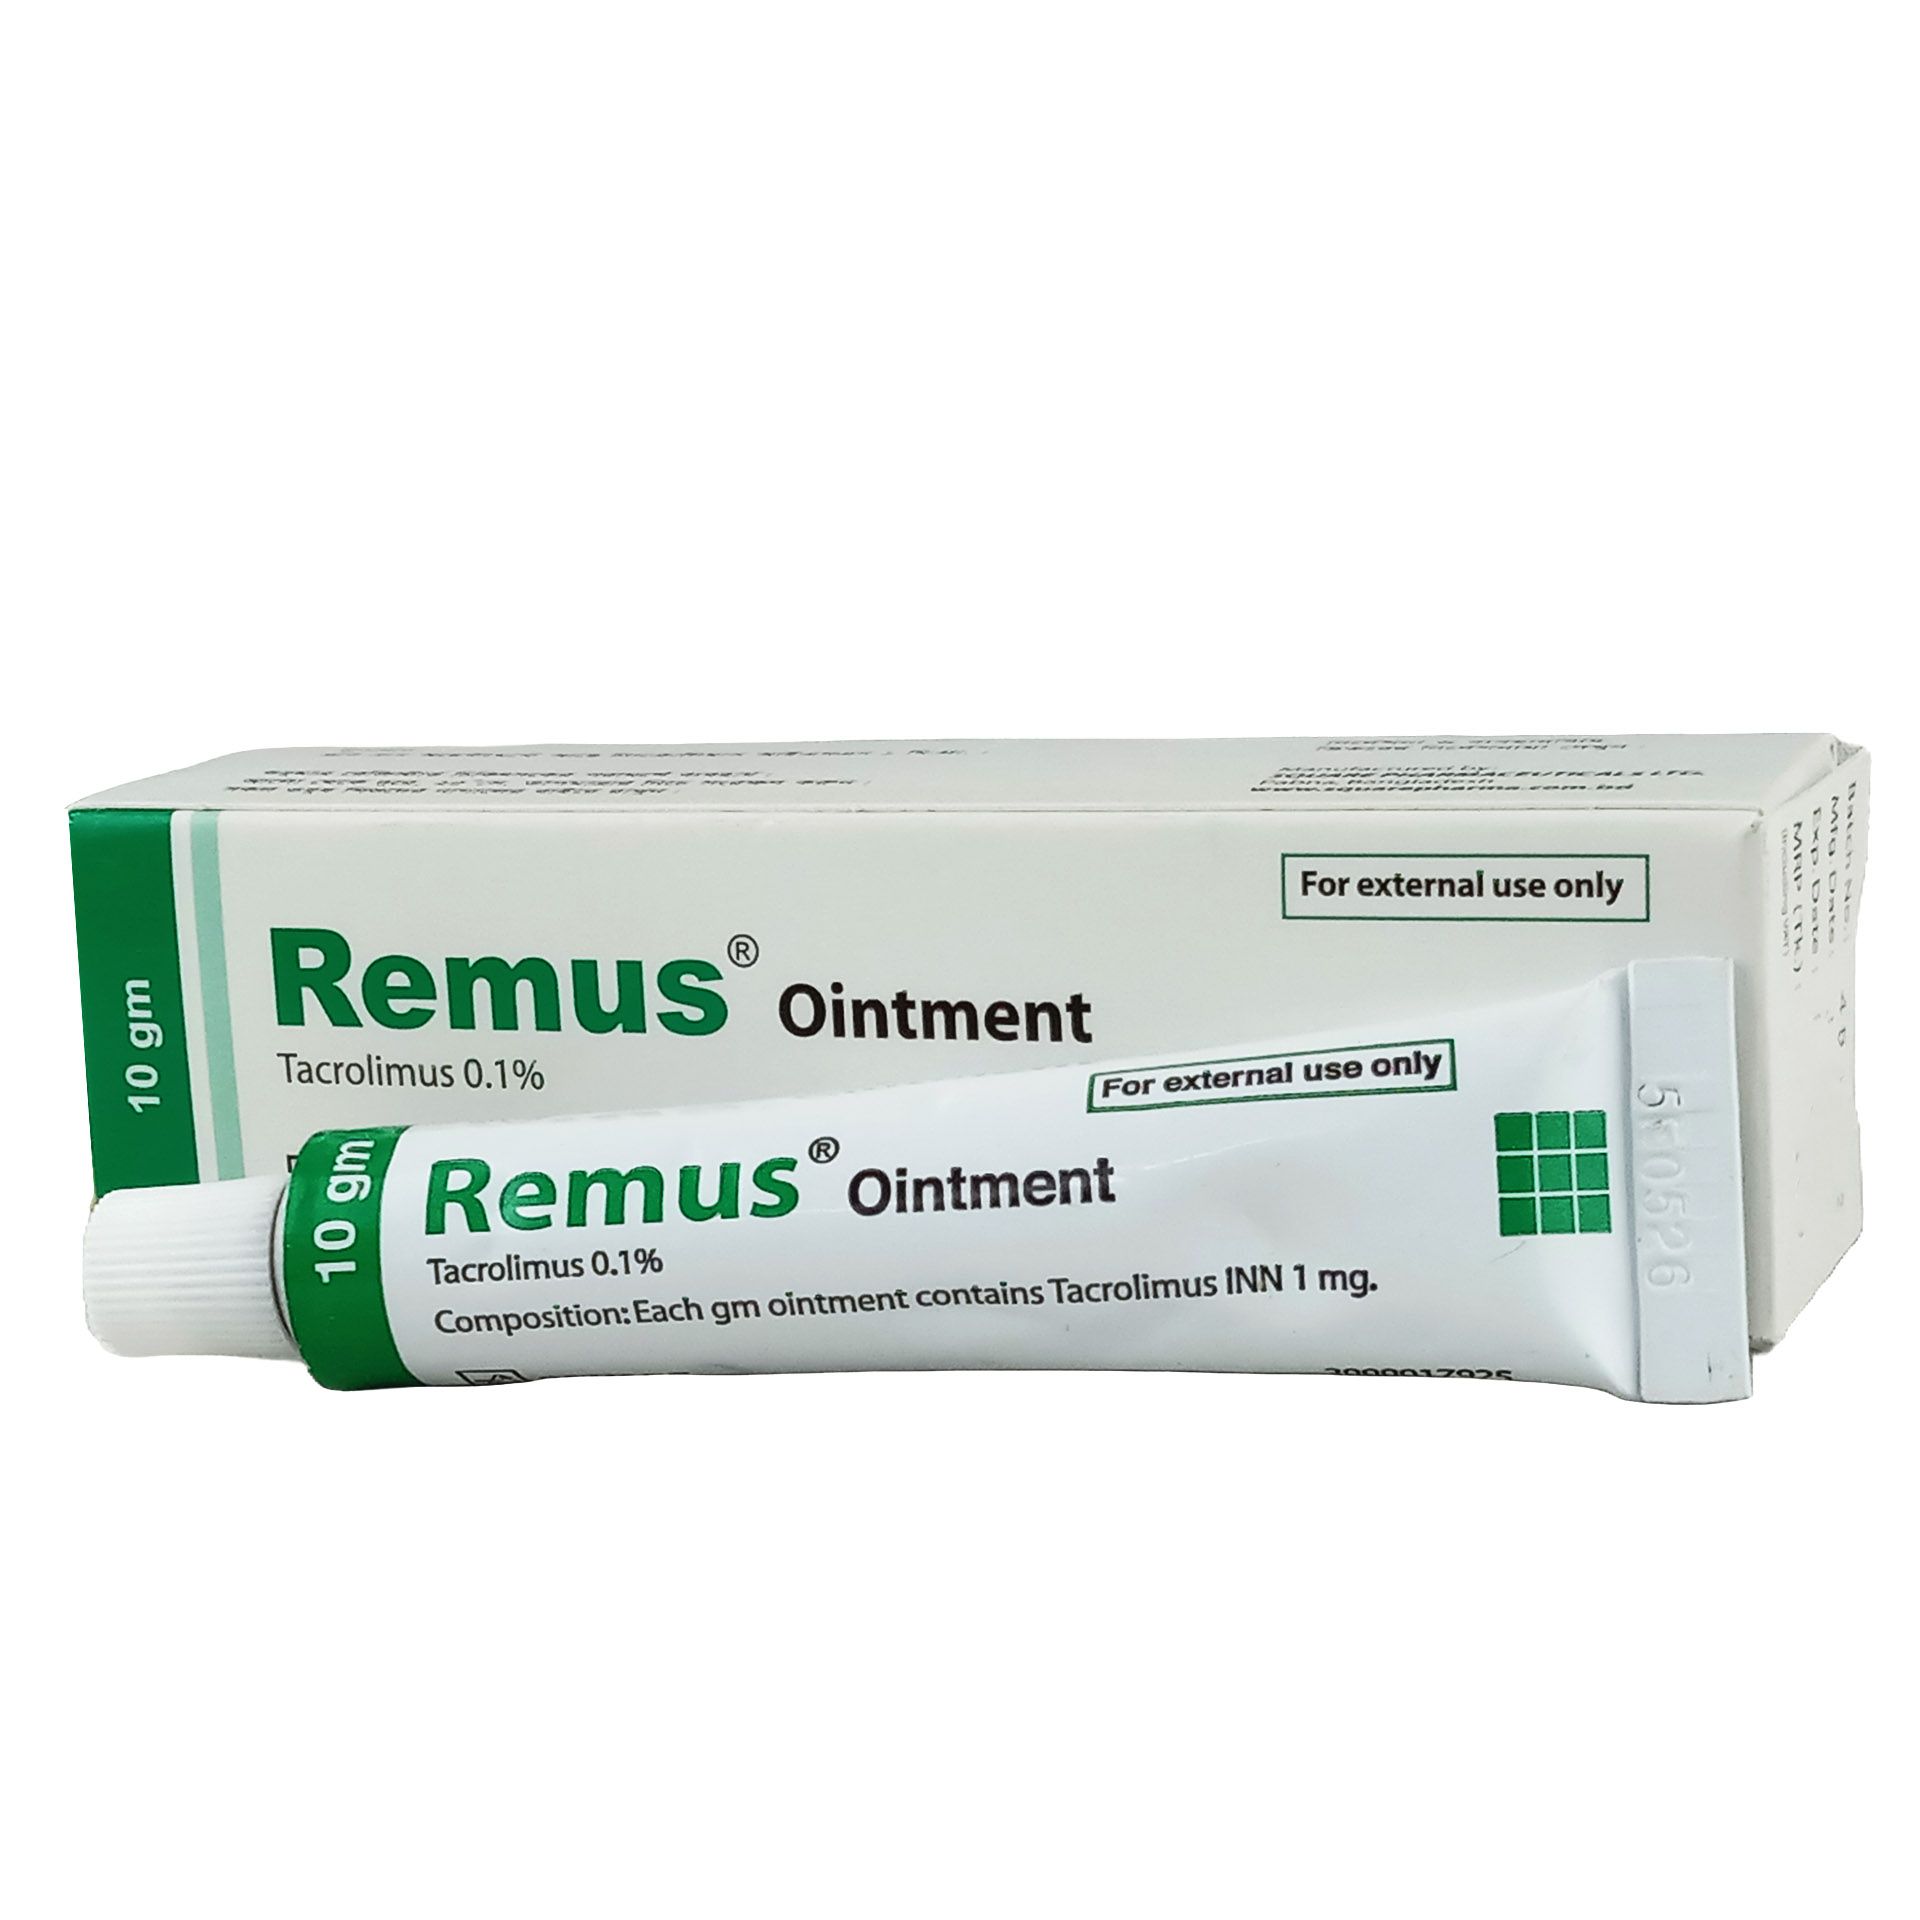 Remus 0.1% 10gm 0.1% Ointment